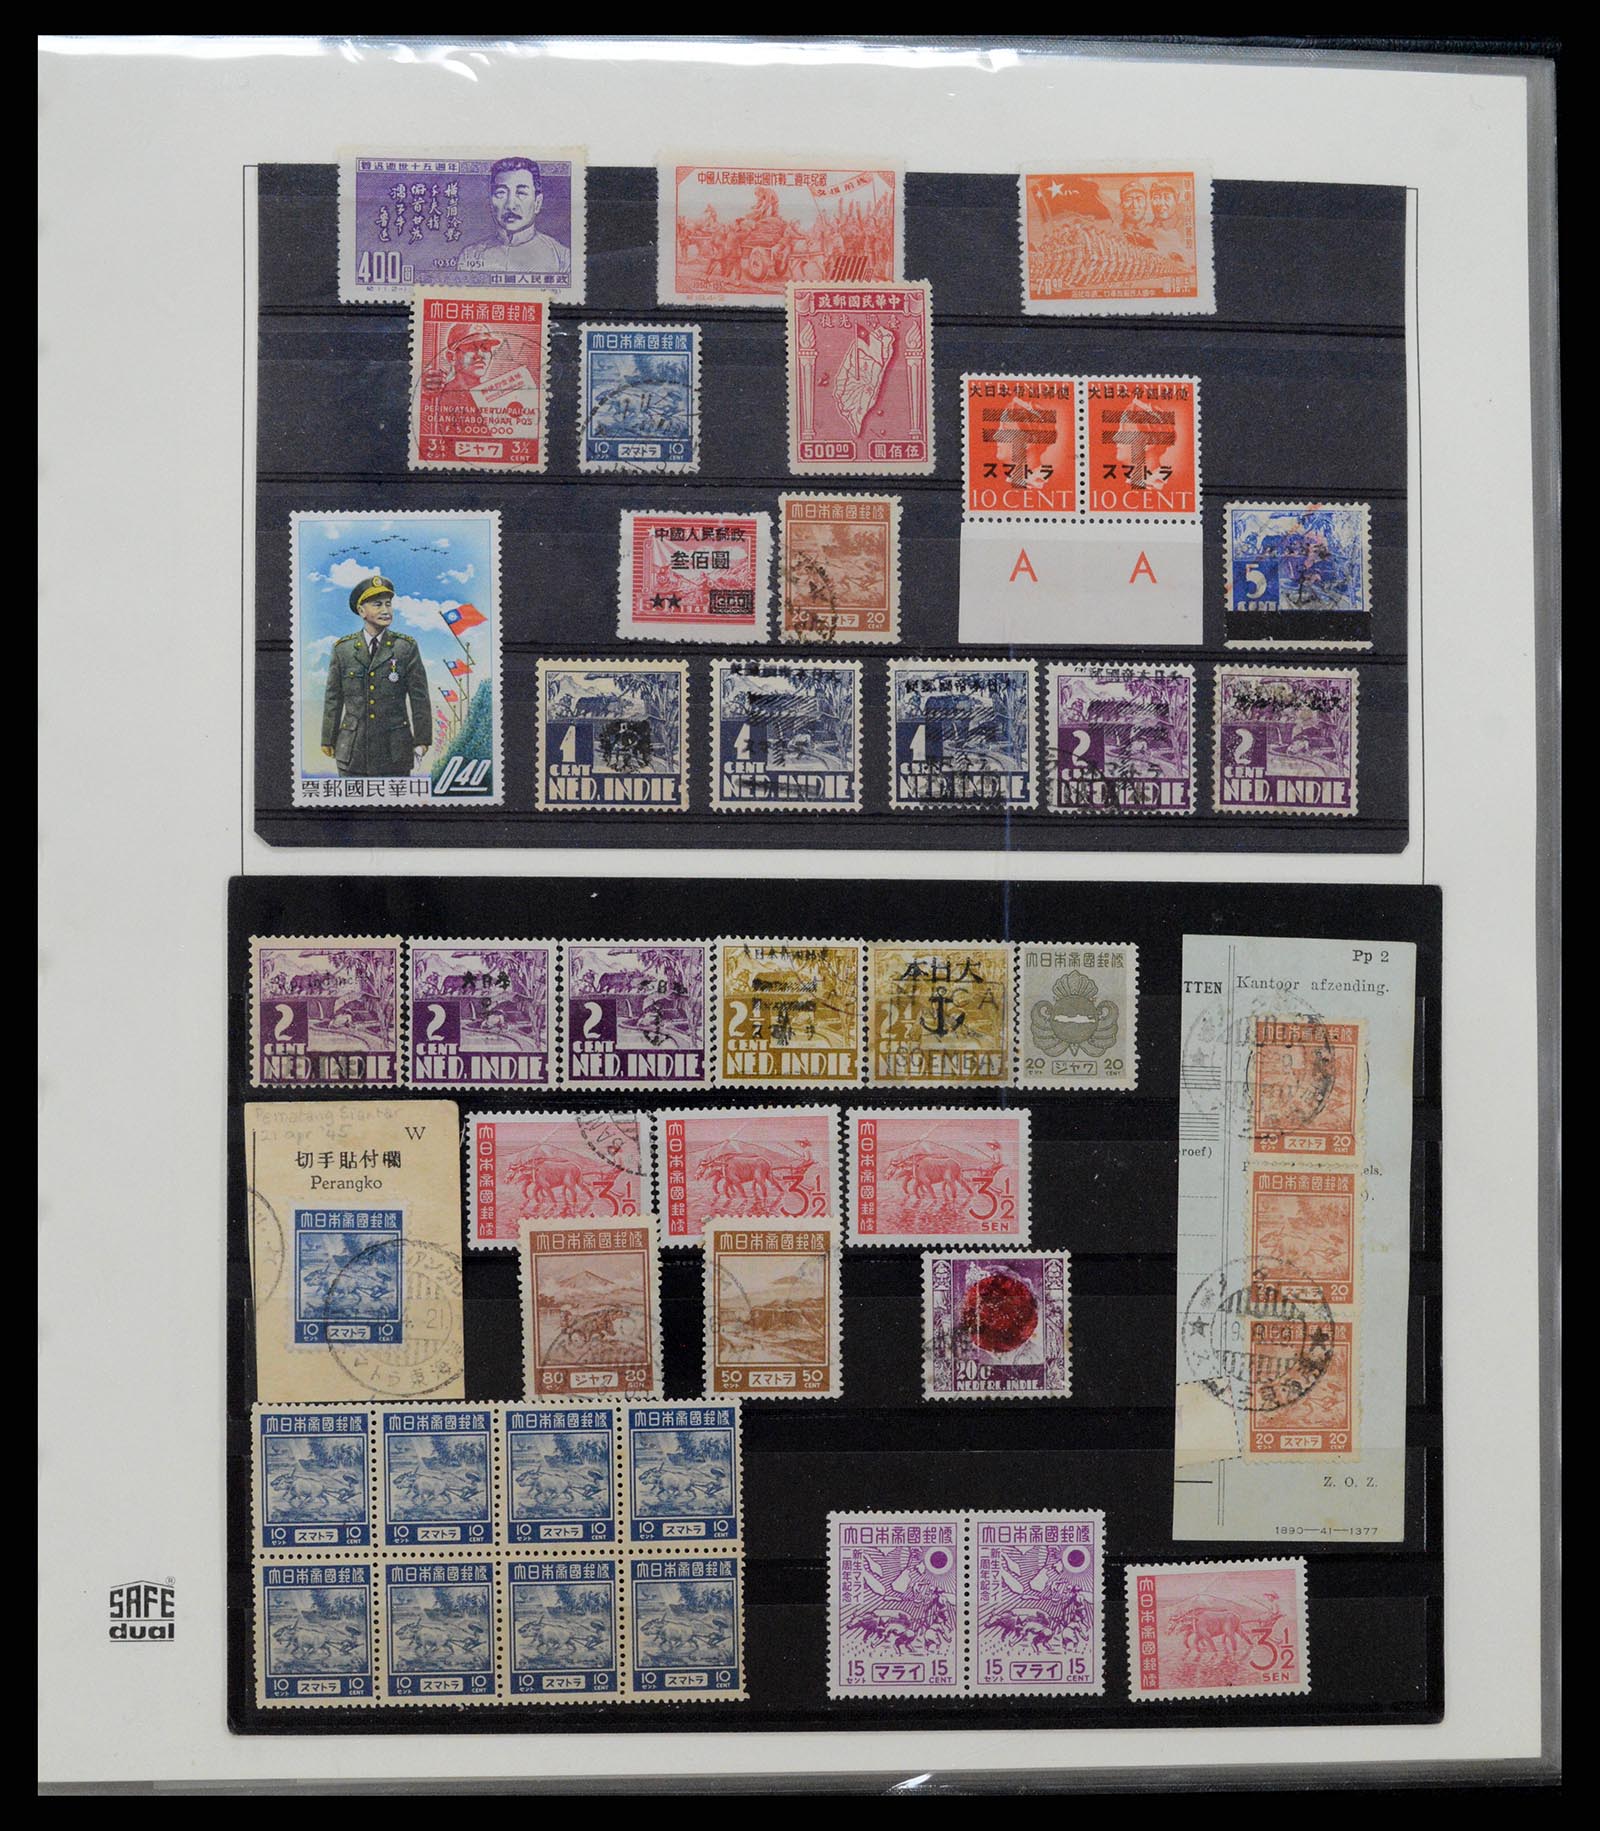 37689 025 - Stamp collection 37689 Japanese occupation Dutch East Indies and interim